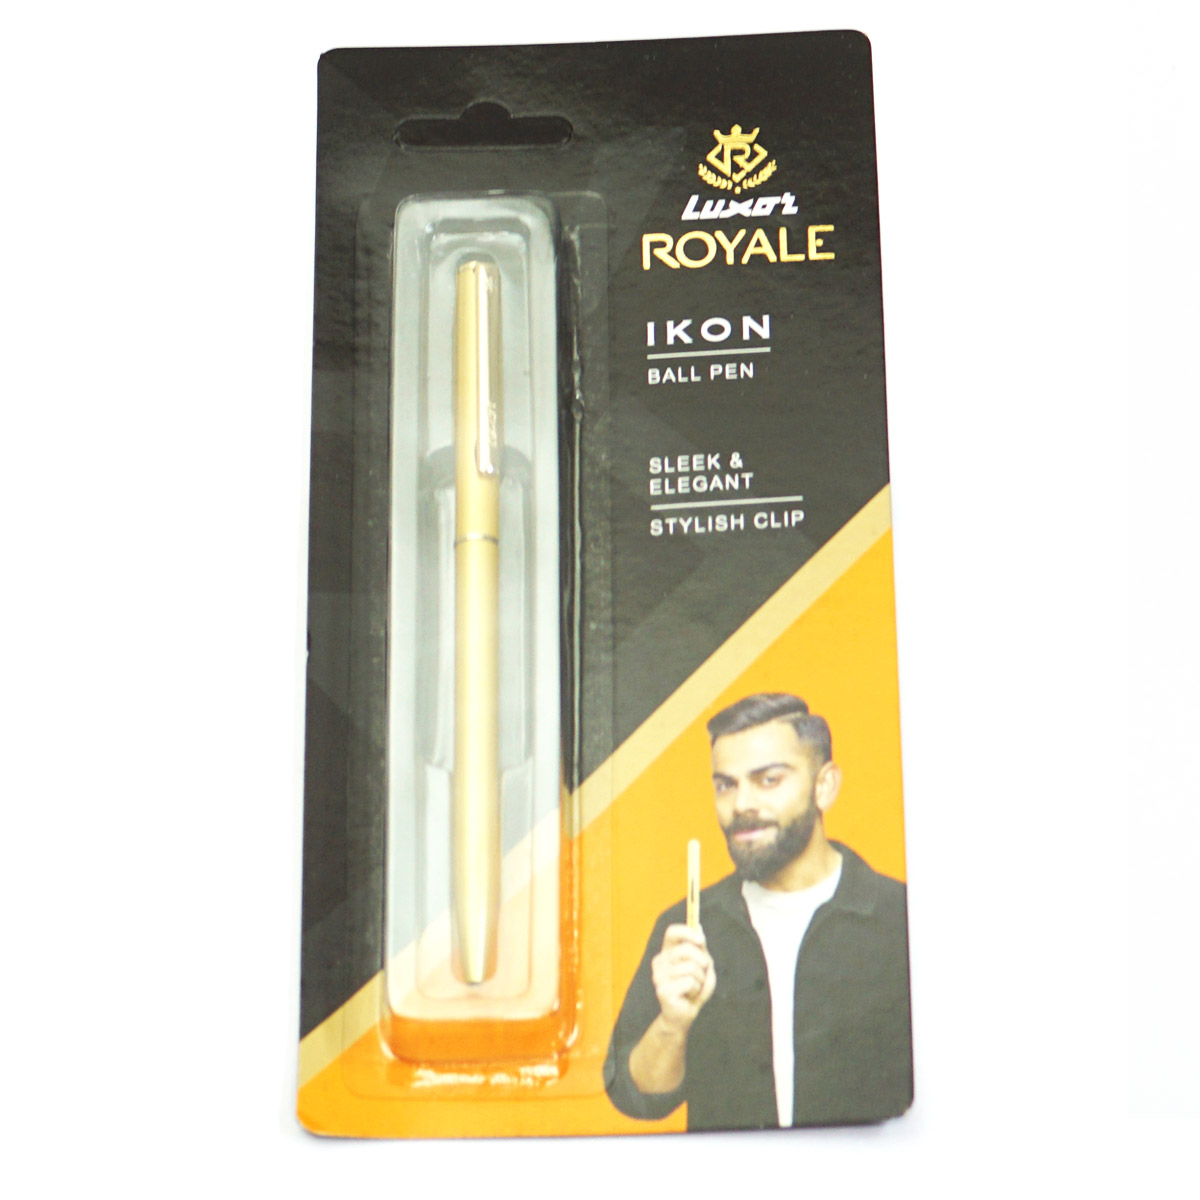 Luxor Royale Ikon Slim Full Glossy Golden Color Body With Fine Tip Twist Type Ball Pen SKU 23429